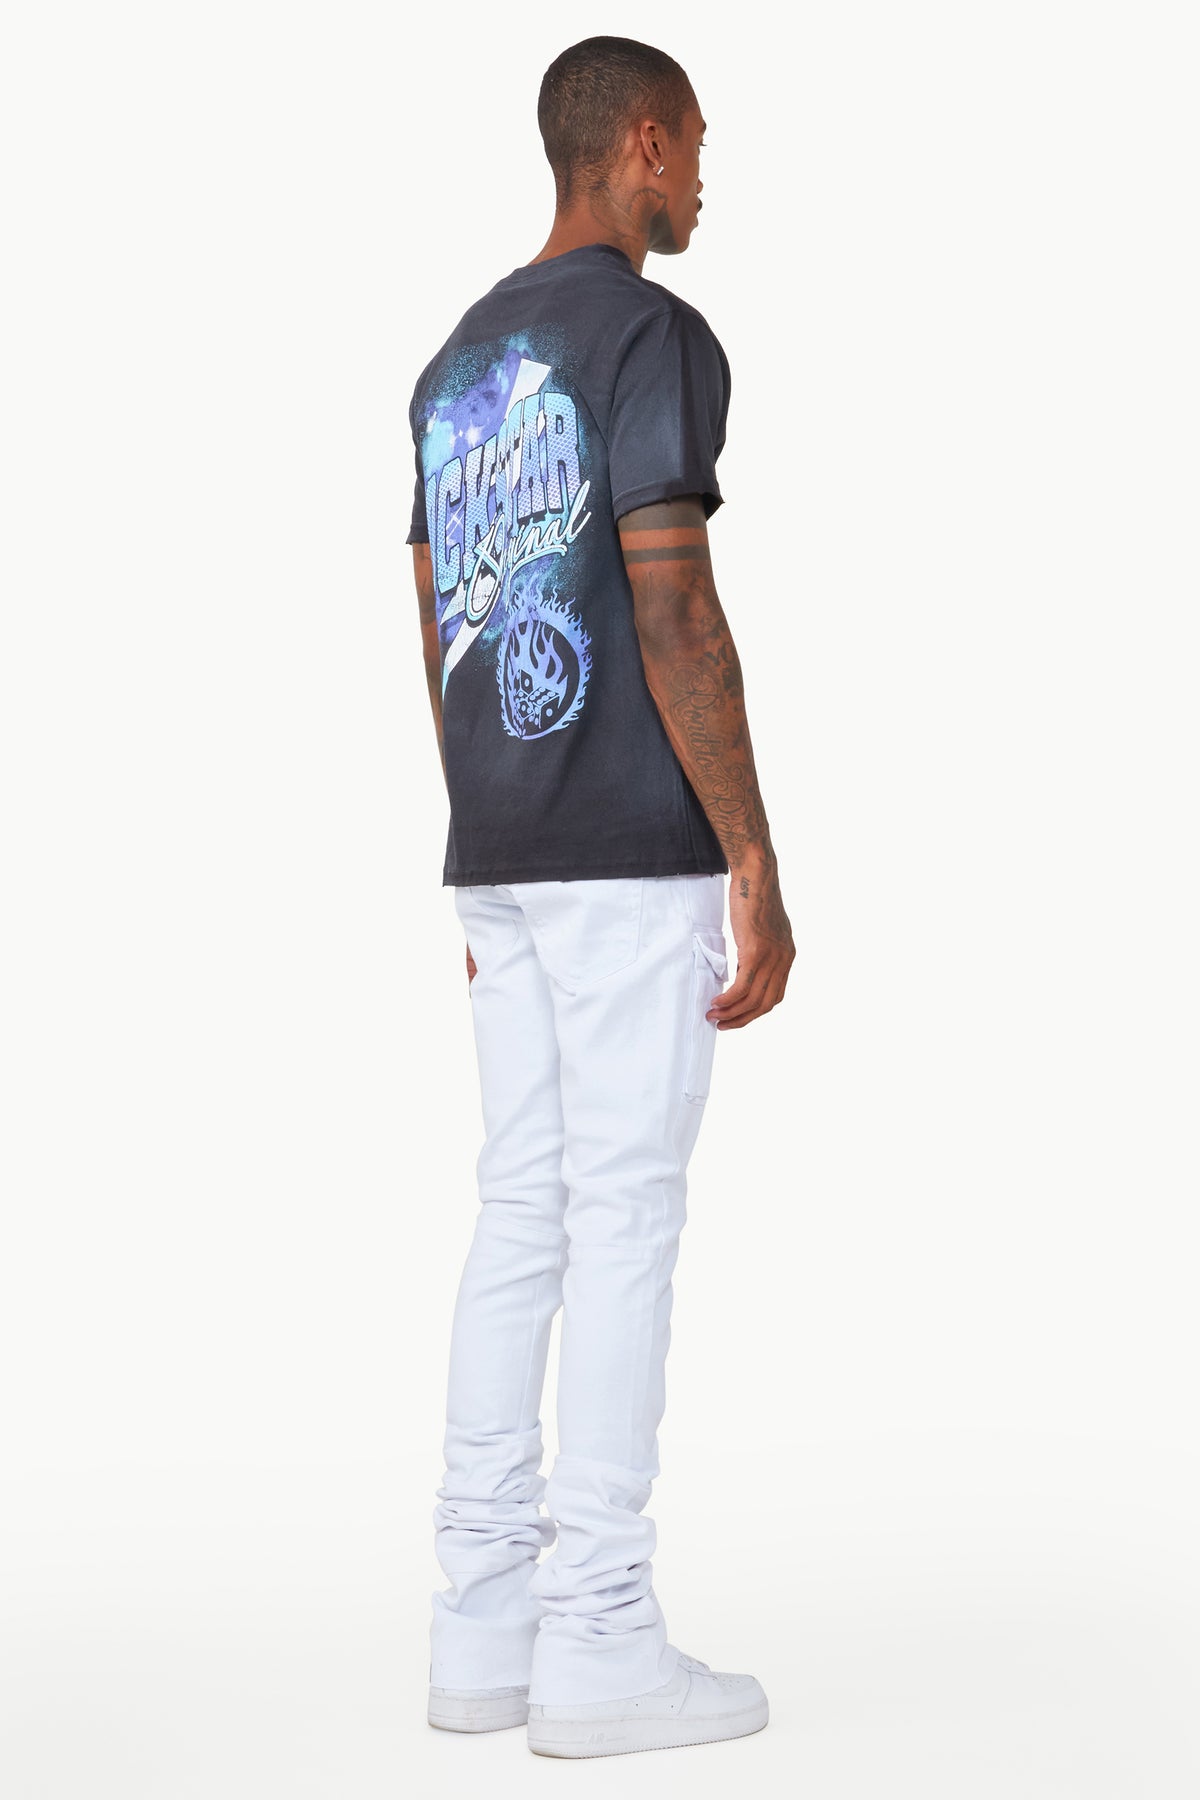 Find the latest Nello Super online Flare Jean MENS Stacked White JEANS